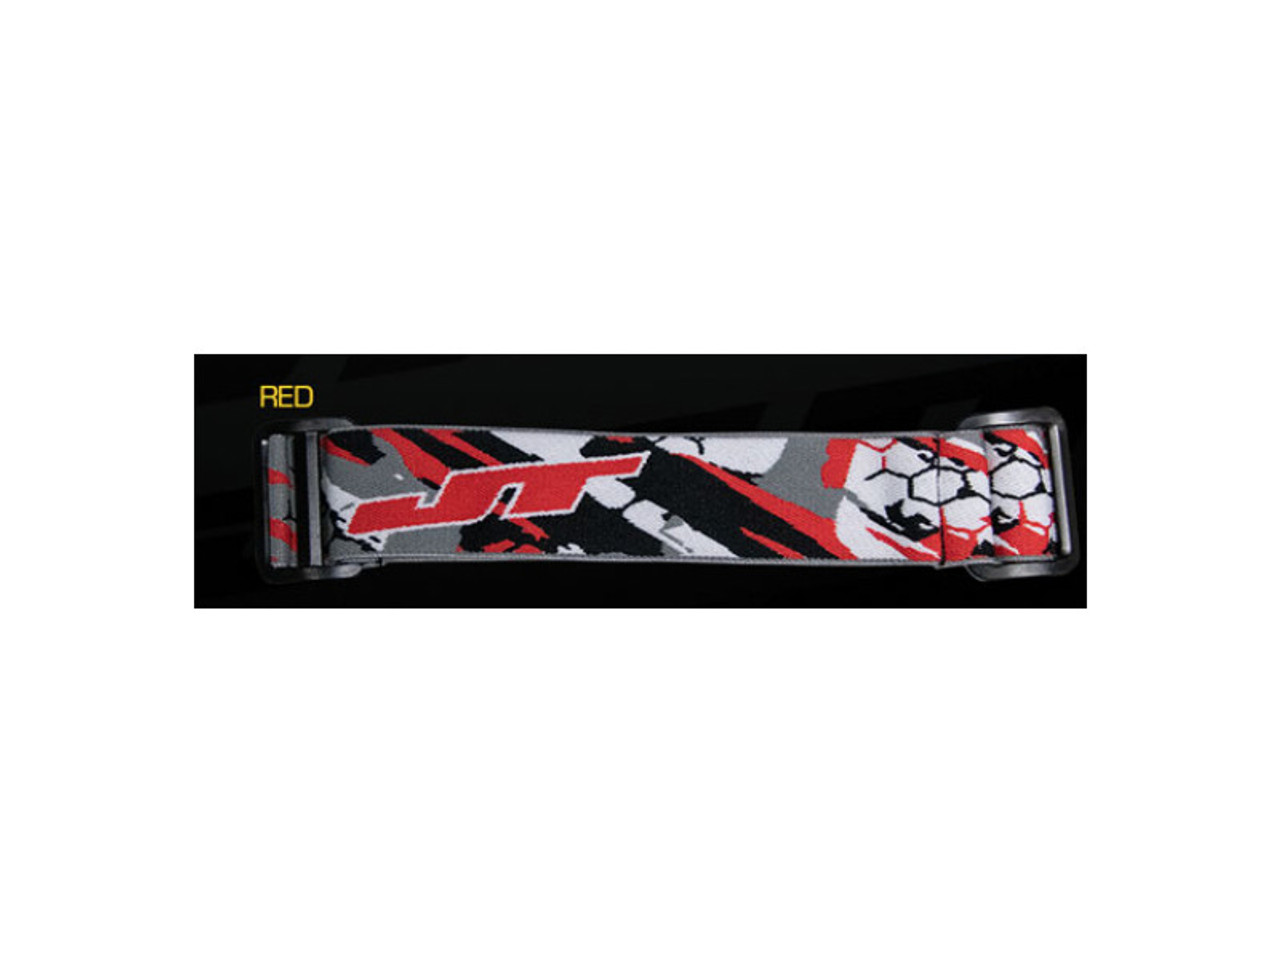 JT Woven Goggle Strap - Red - MR Paintball Gear Canada